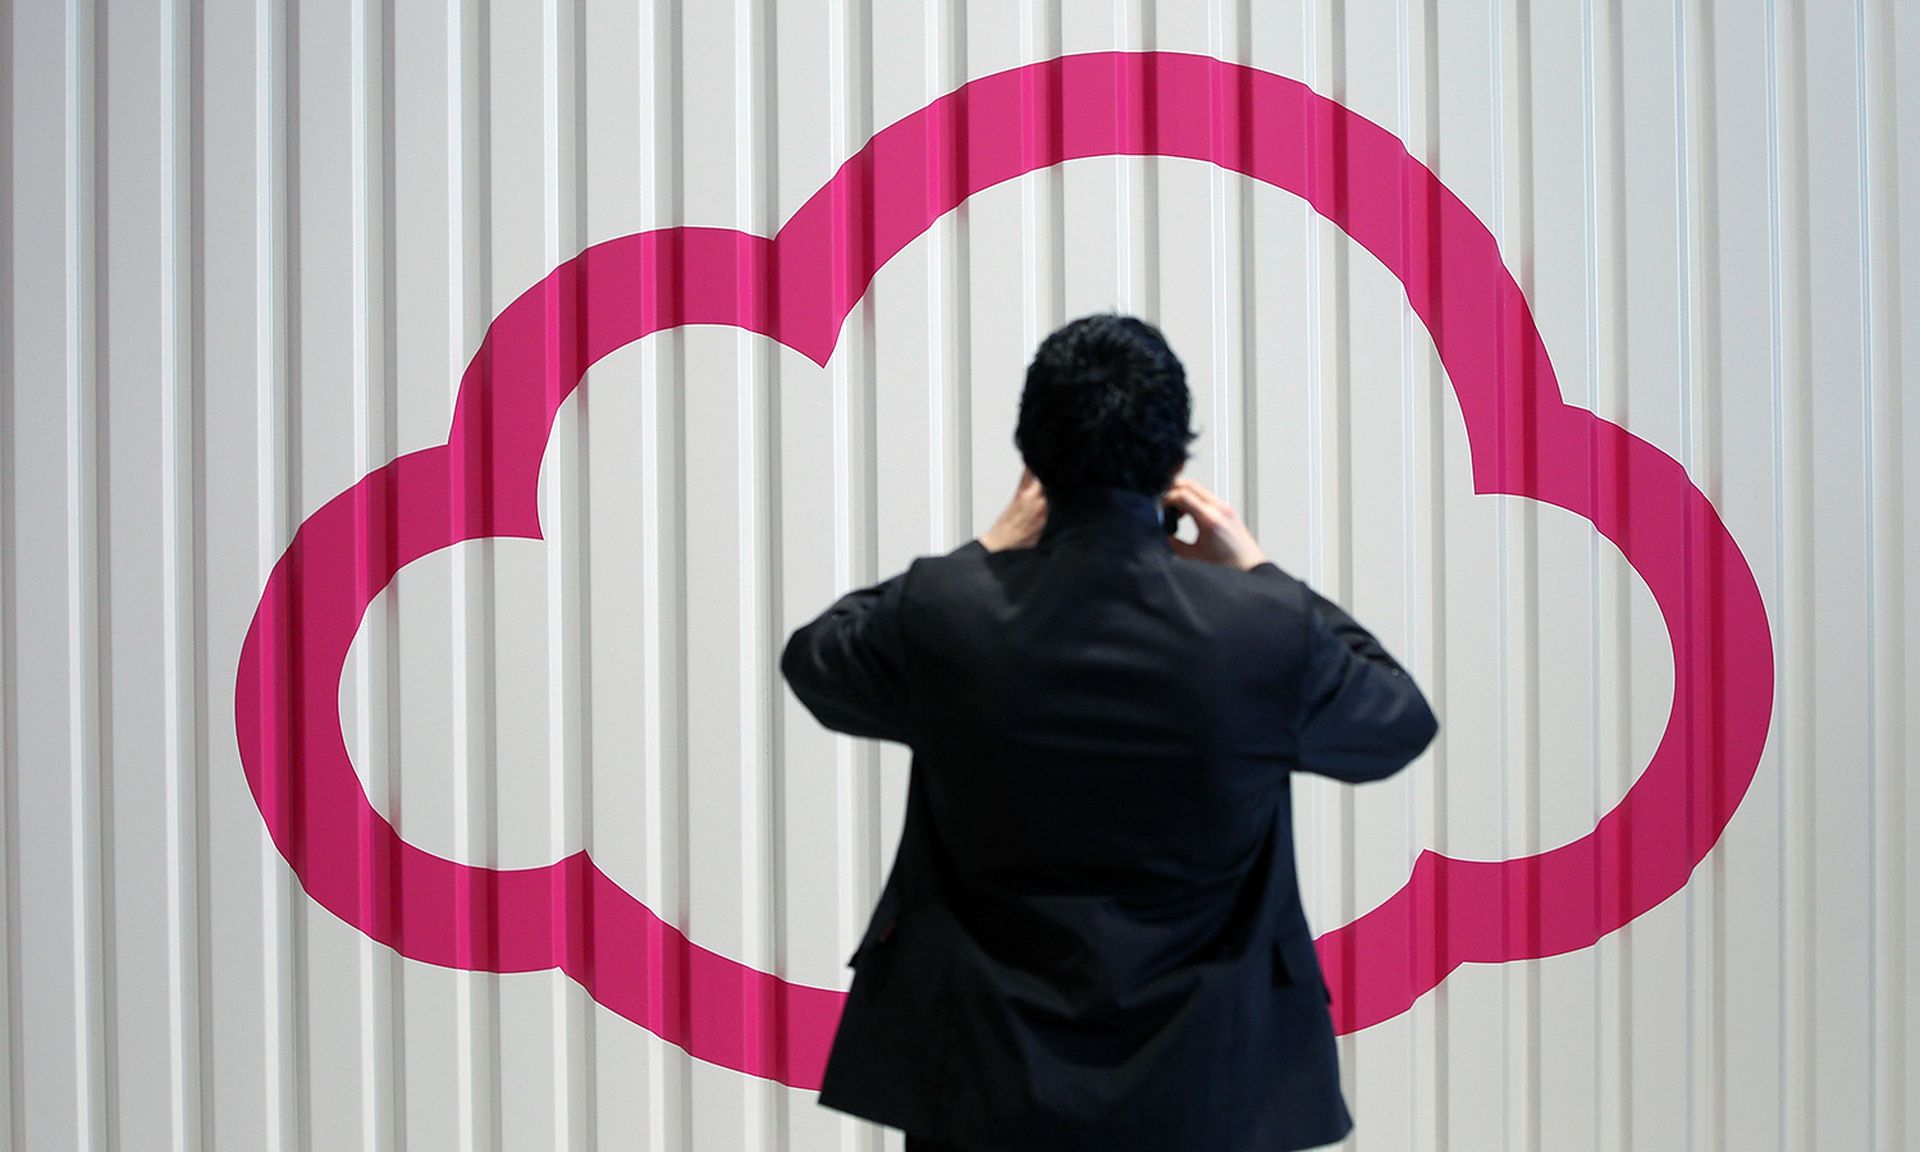 Swimlane raised $70 million in a growth funding round aimed at expanding its security automation products. Pictured: A visitor photographs a symbol of a cloud at the CeBIT 2012 technology trade fair on March 5, 2012, in Hanover, Germany. (Photo by Sean Gallup/Getty Images)